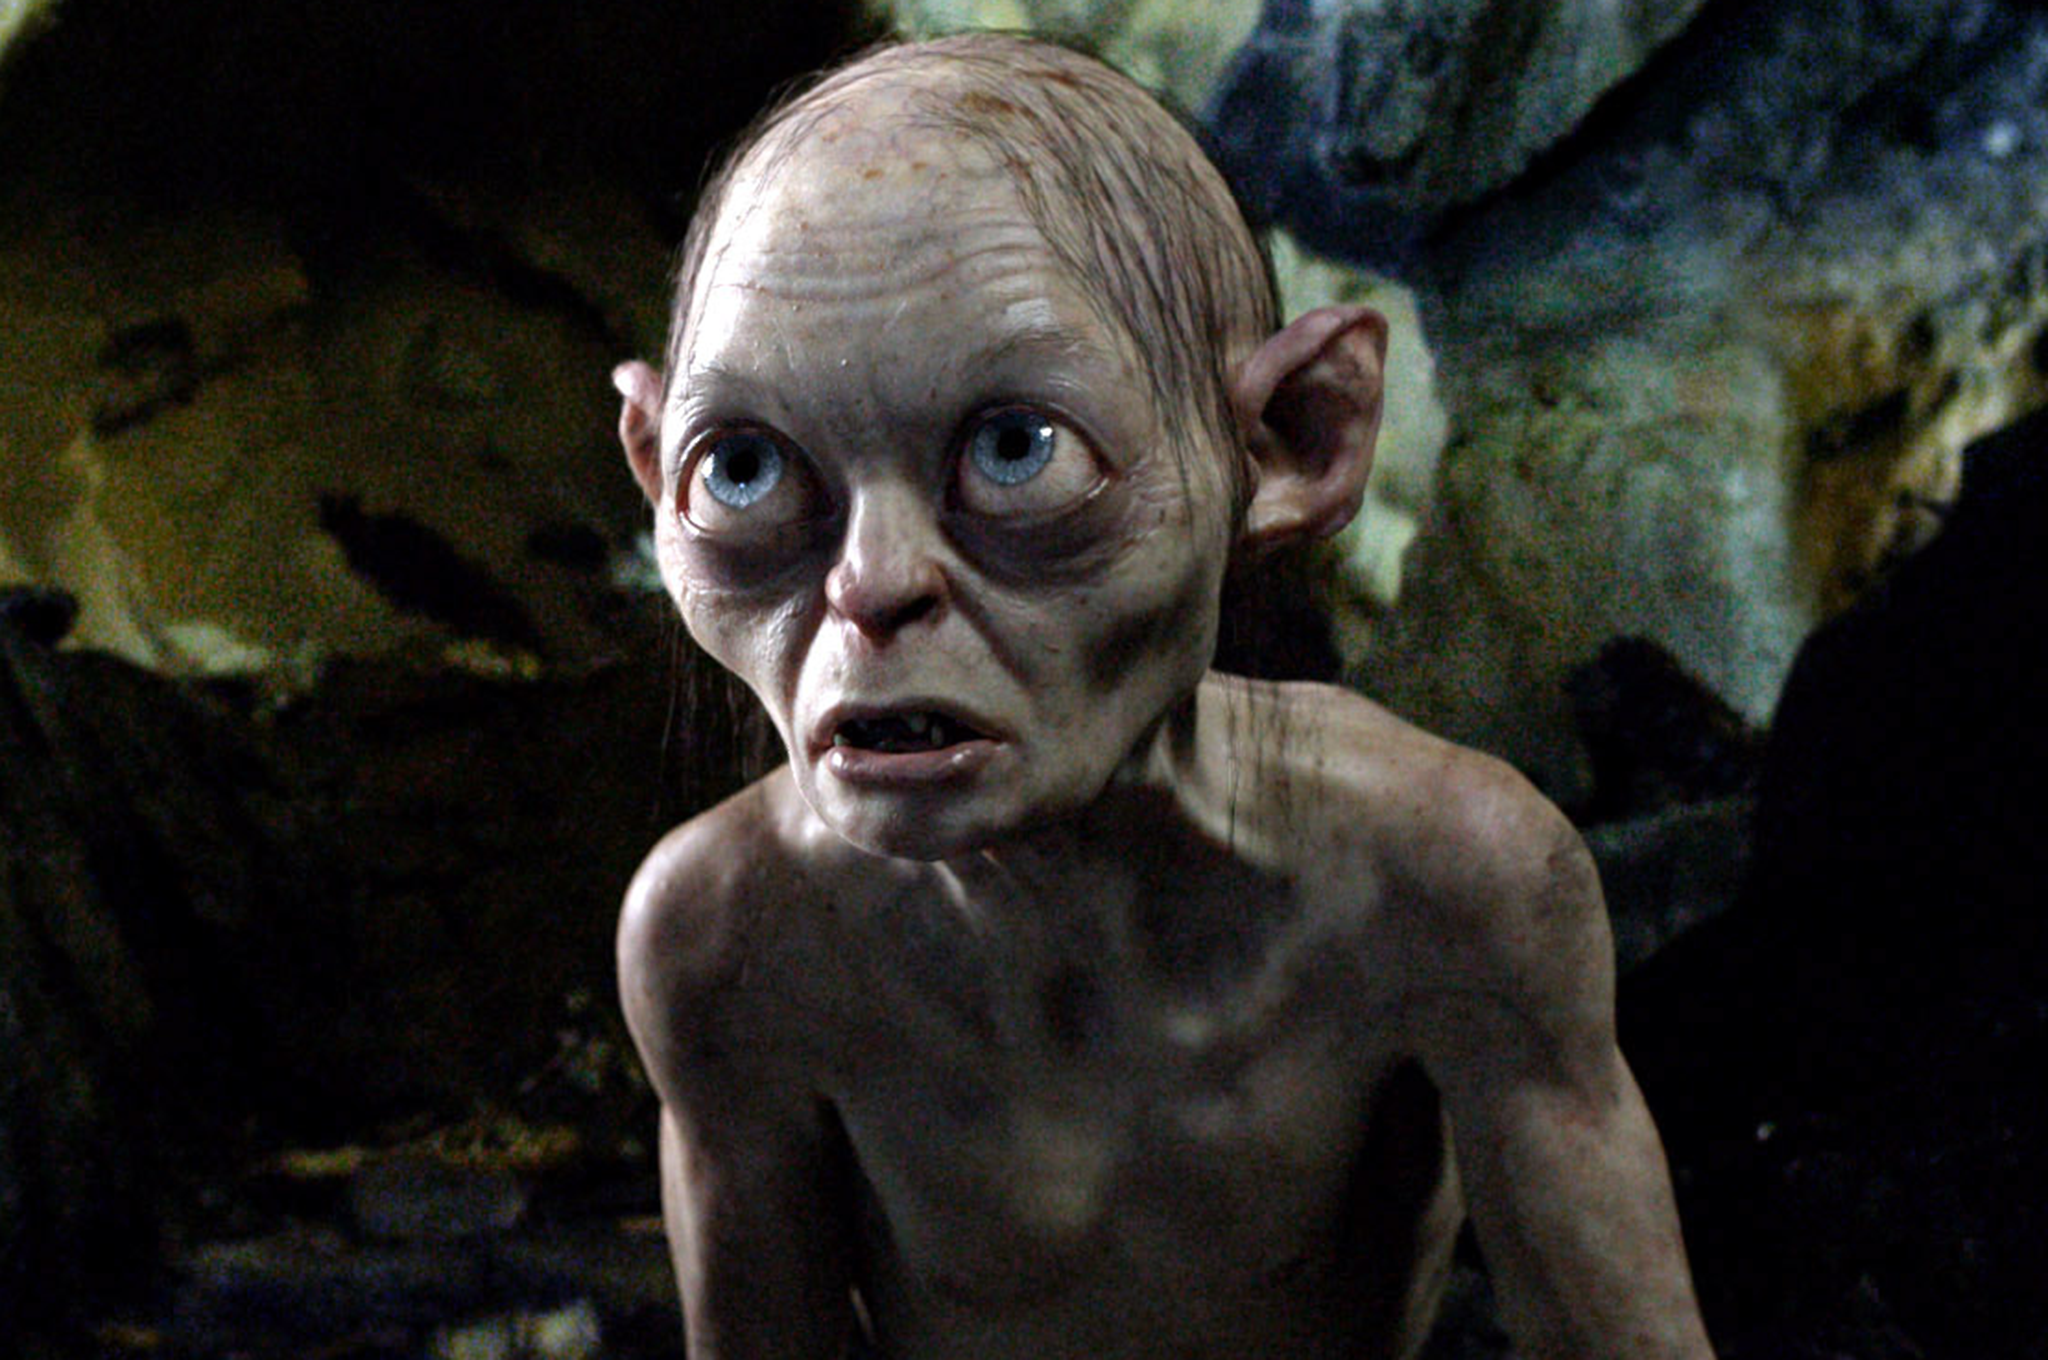 New Lord of the Rings Video Games Will Need to Learn From Gollum's Failure